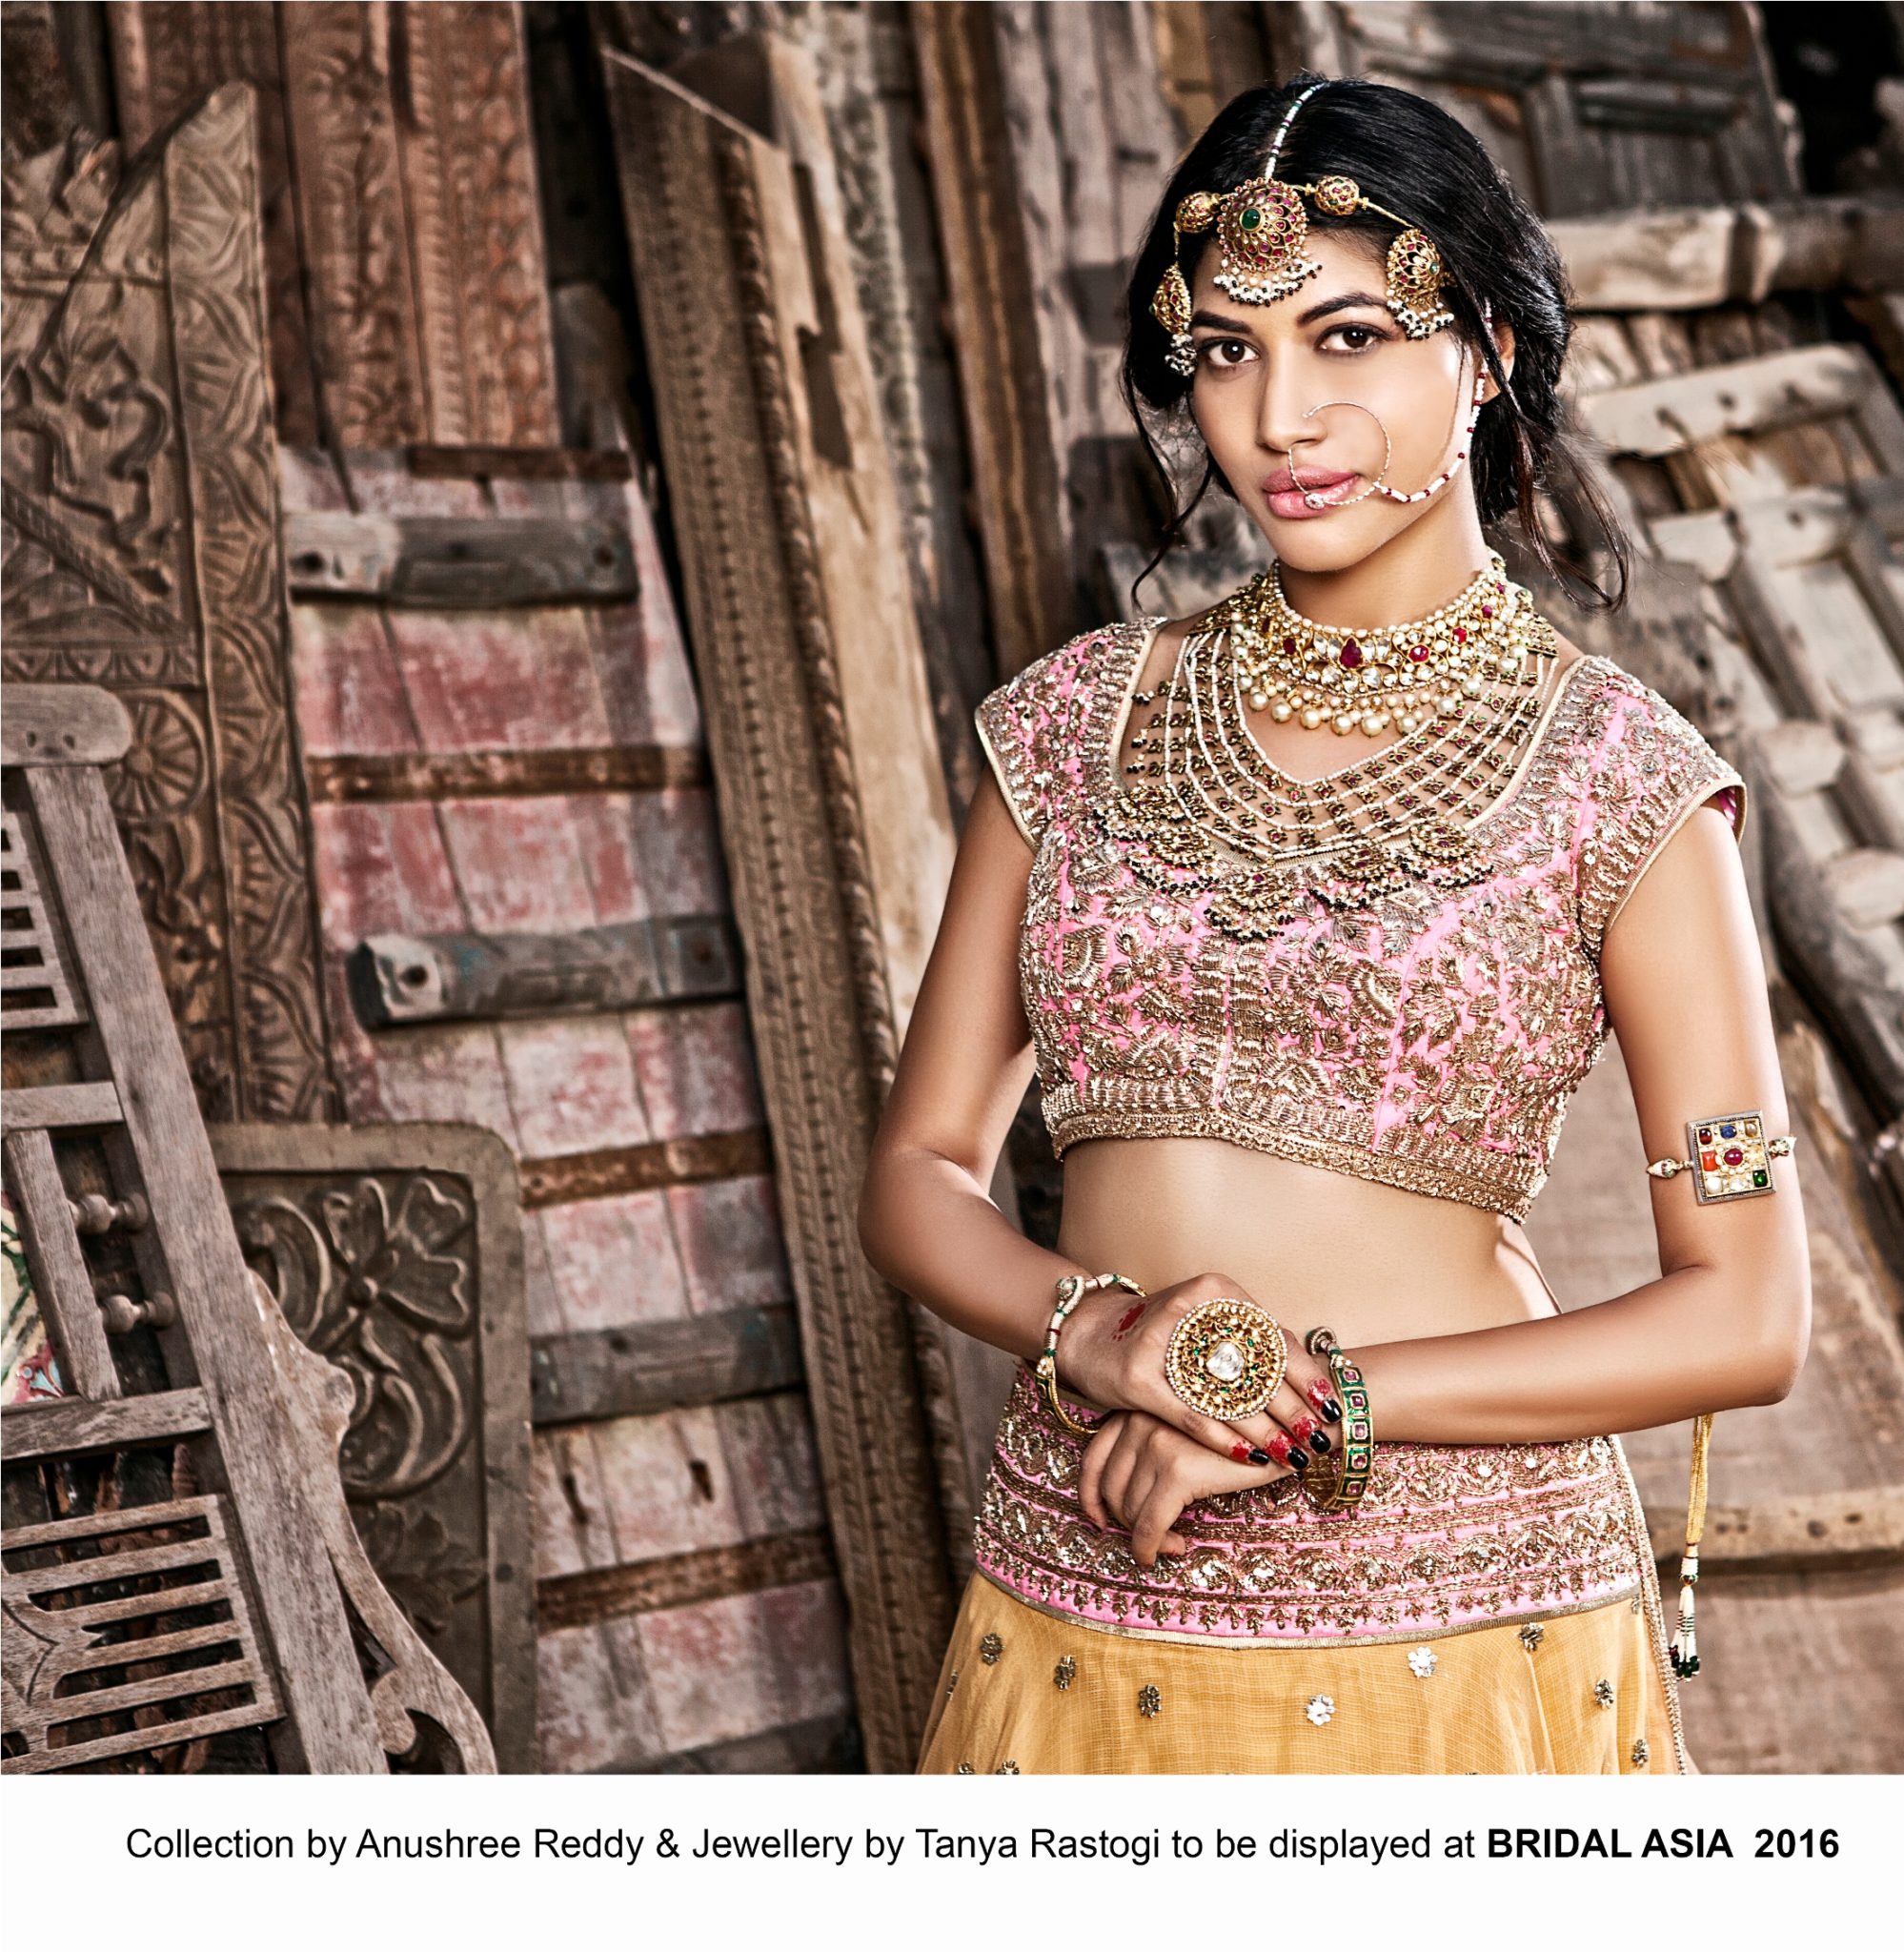 Collection by Anushree Reddy & Jewellery by Tanya Rastogi to be displayed at BRIDAL ASIA 2016